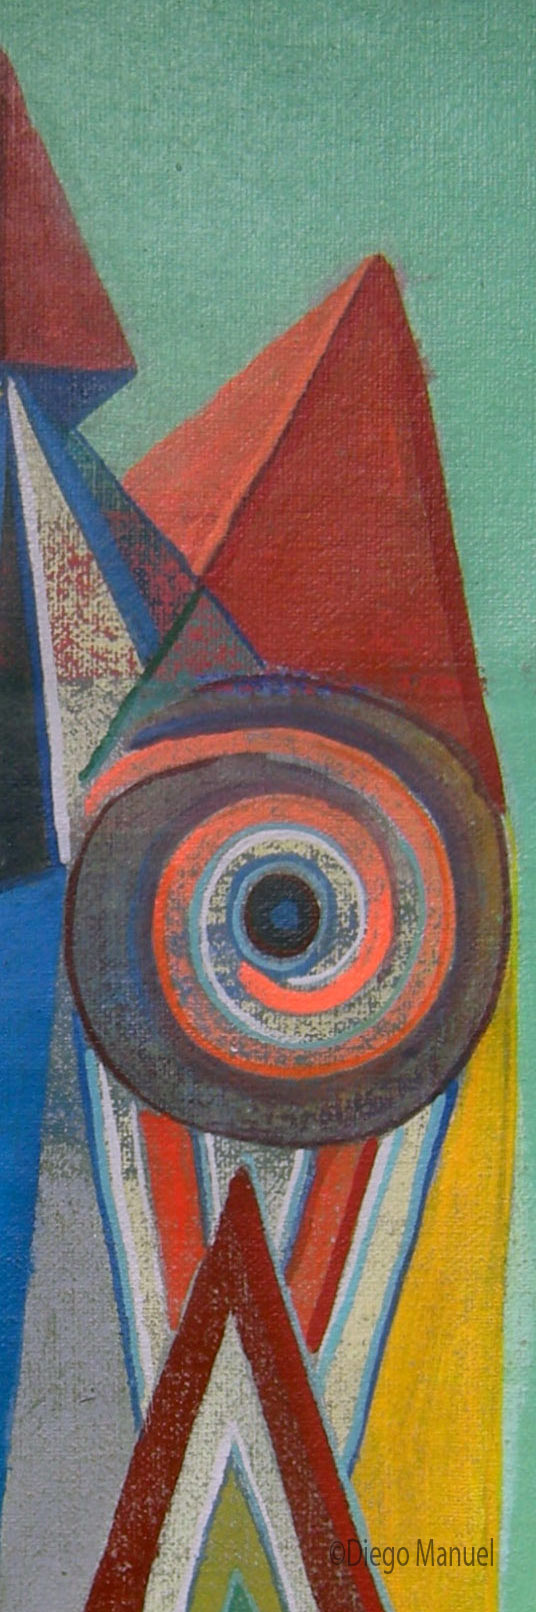 Astrapop 28, acrlico sobre tela, 31,5 x 19 cm. 2015. Abstract colorful painting